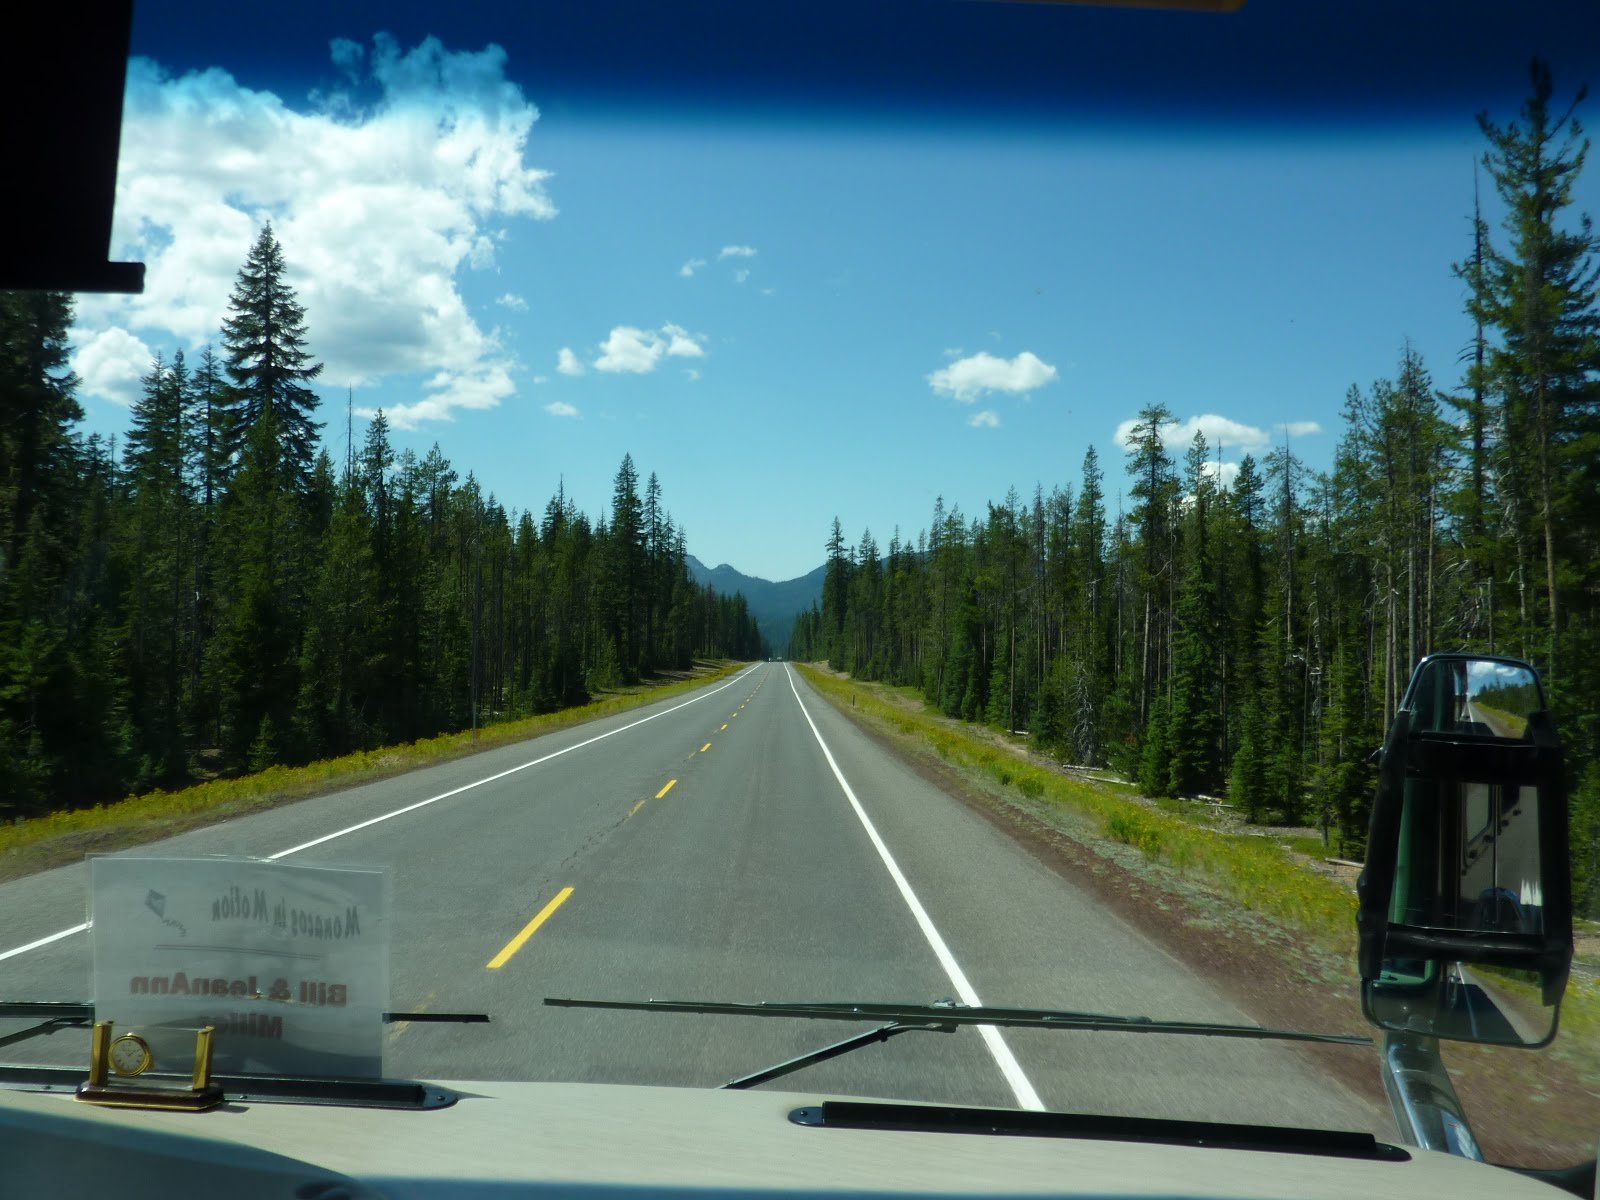 This was a beautiful drive and the Crater Lake RV Park was beautiful 